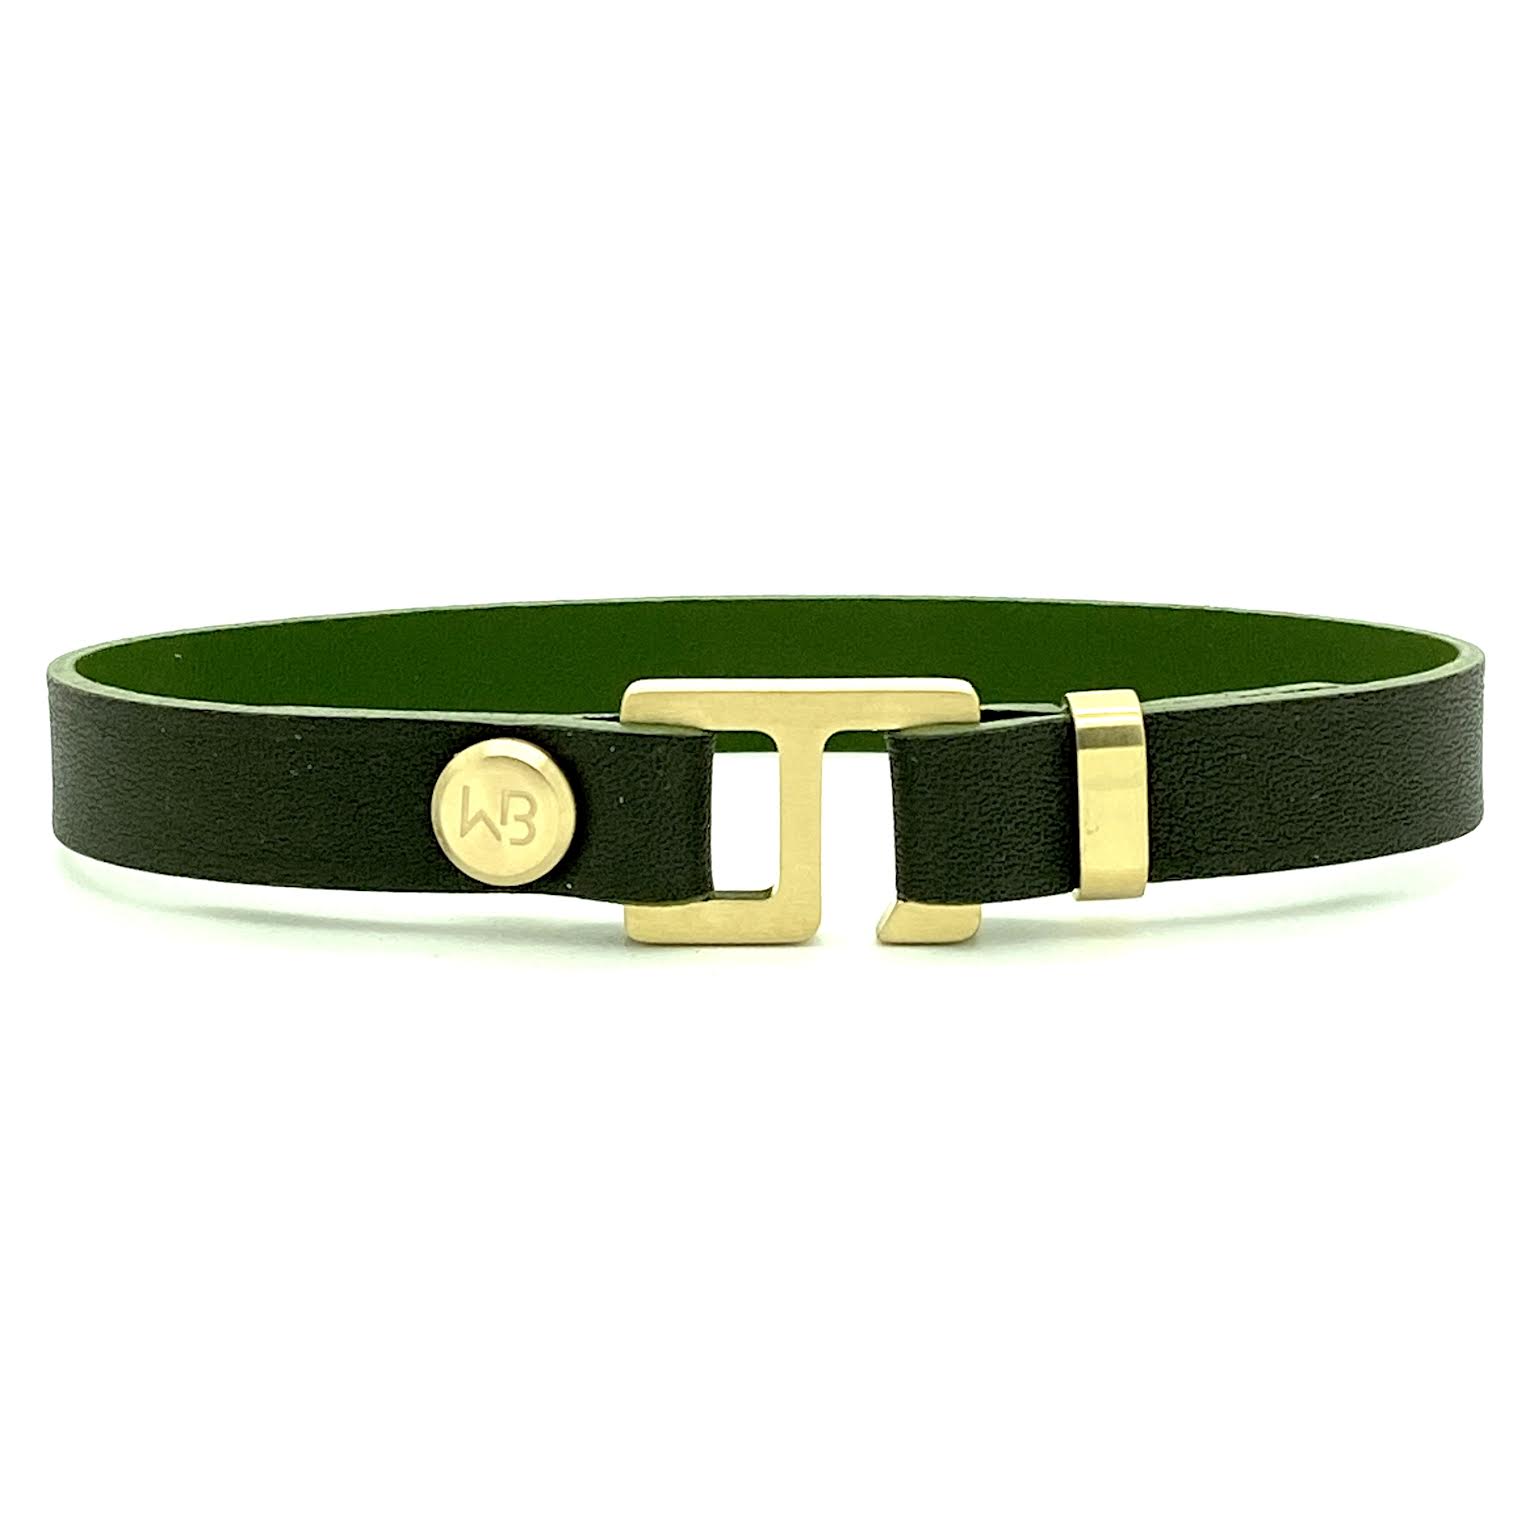 With a trendy, cool modern vibe, this olive/tuscan Italian leather cuff bracelet is paired with your choice of brushed stainless steel, or black ceramic hardware. Our signature cuff bracelet is a modern staple for your WristBend collection. Made by WristBend